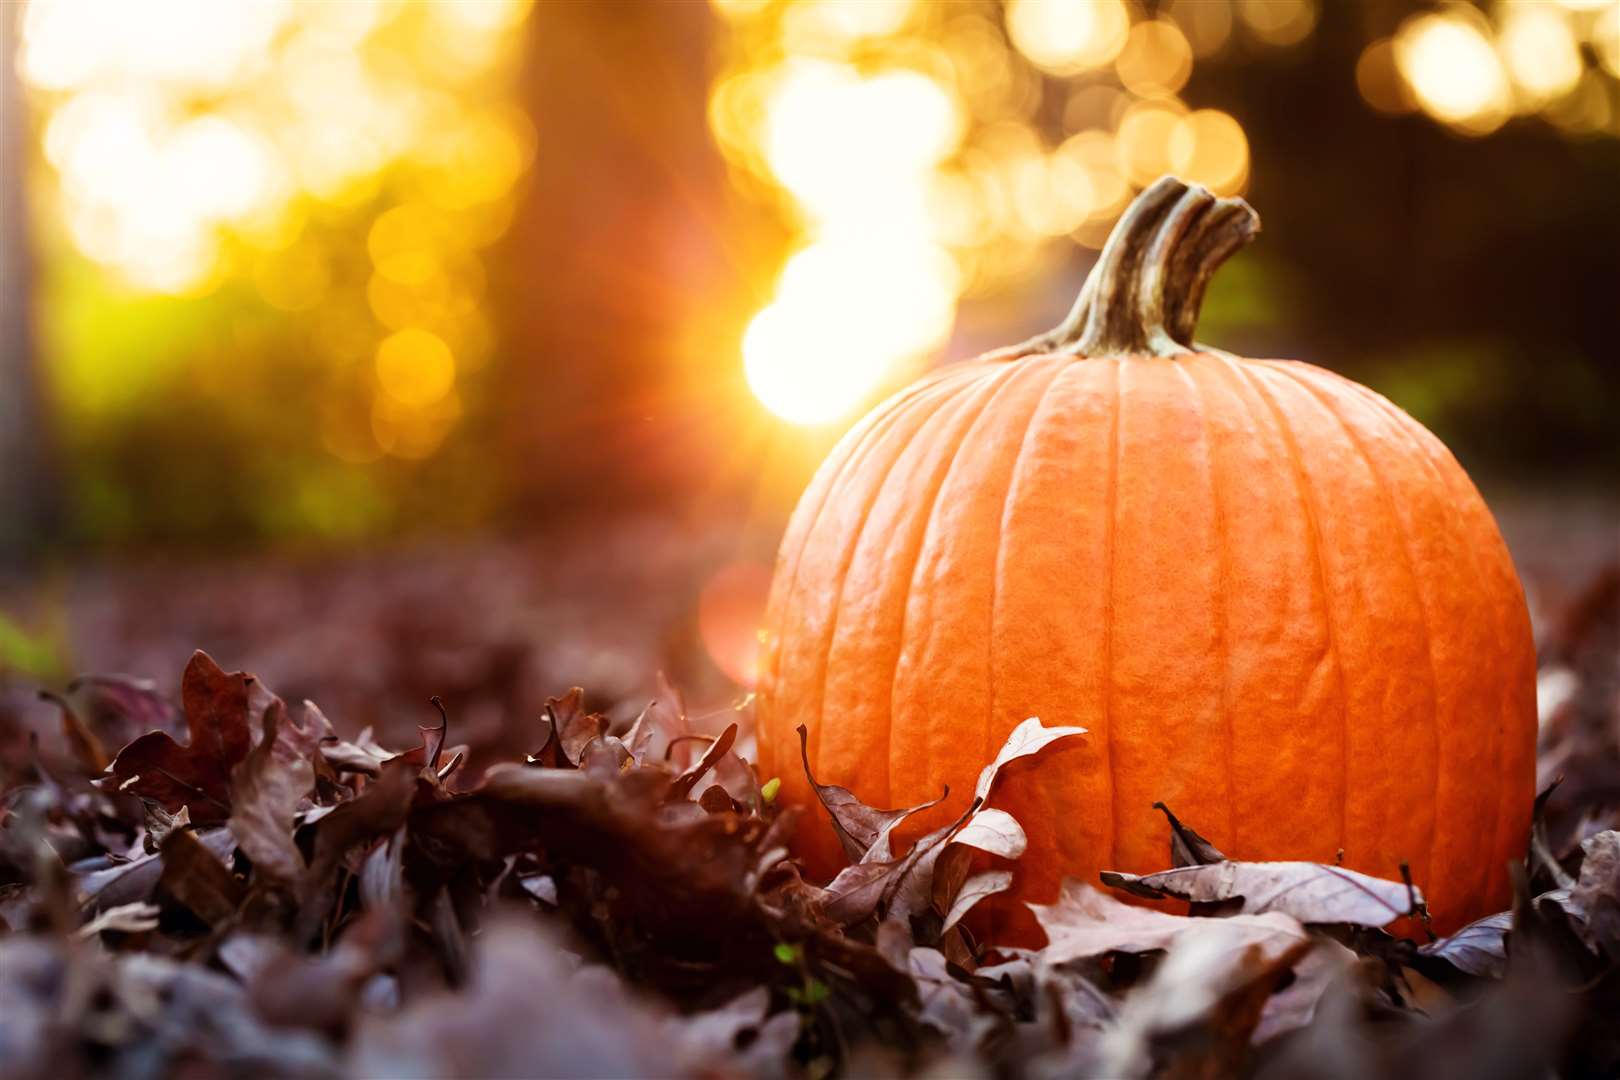 There are lots of family-friendly Halloween events happening in Kent